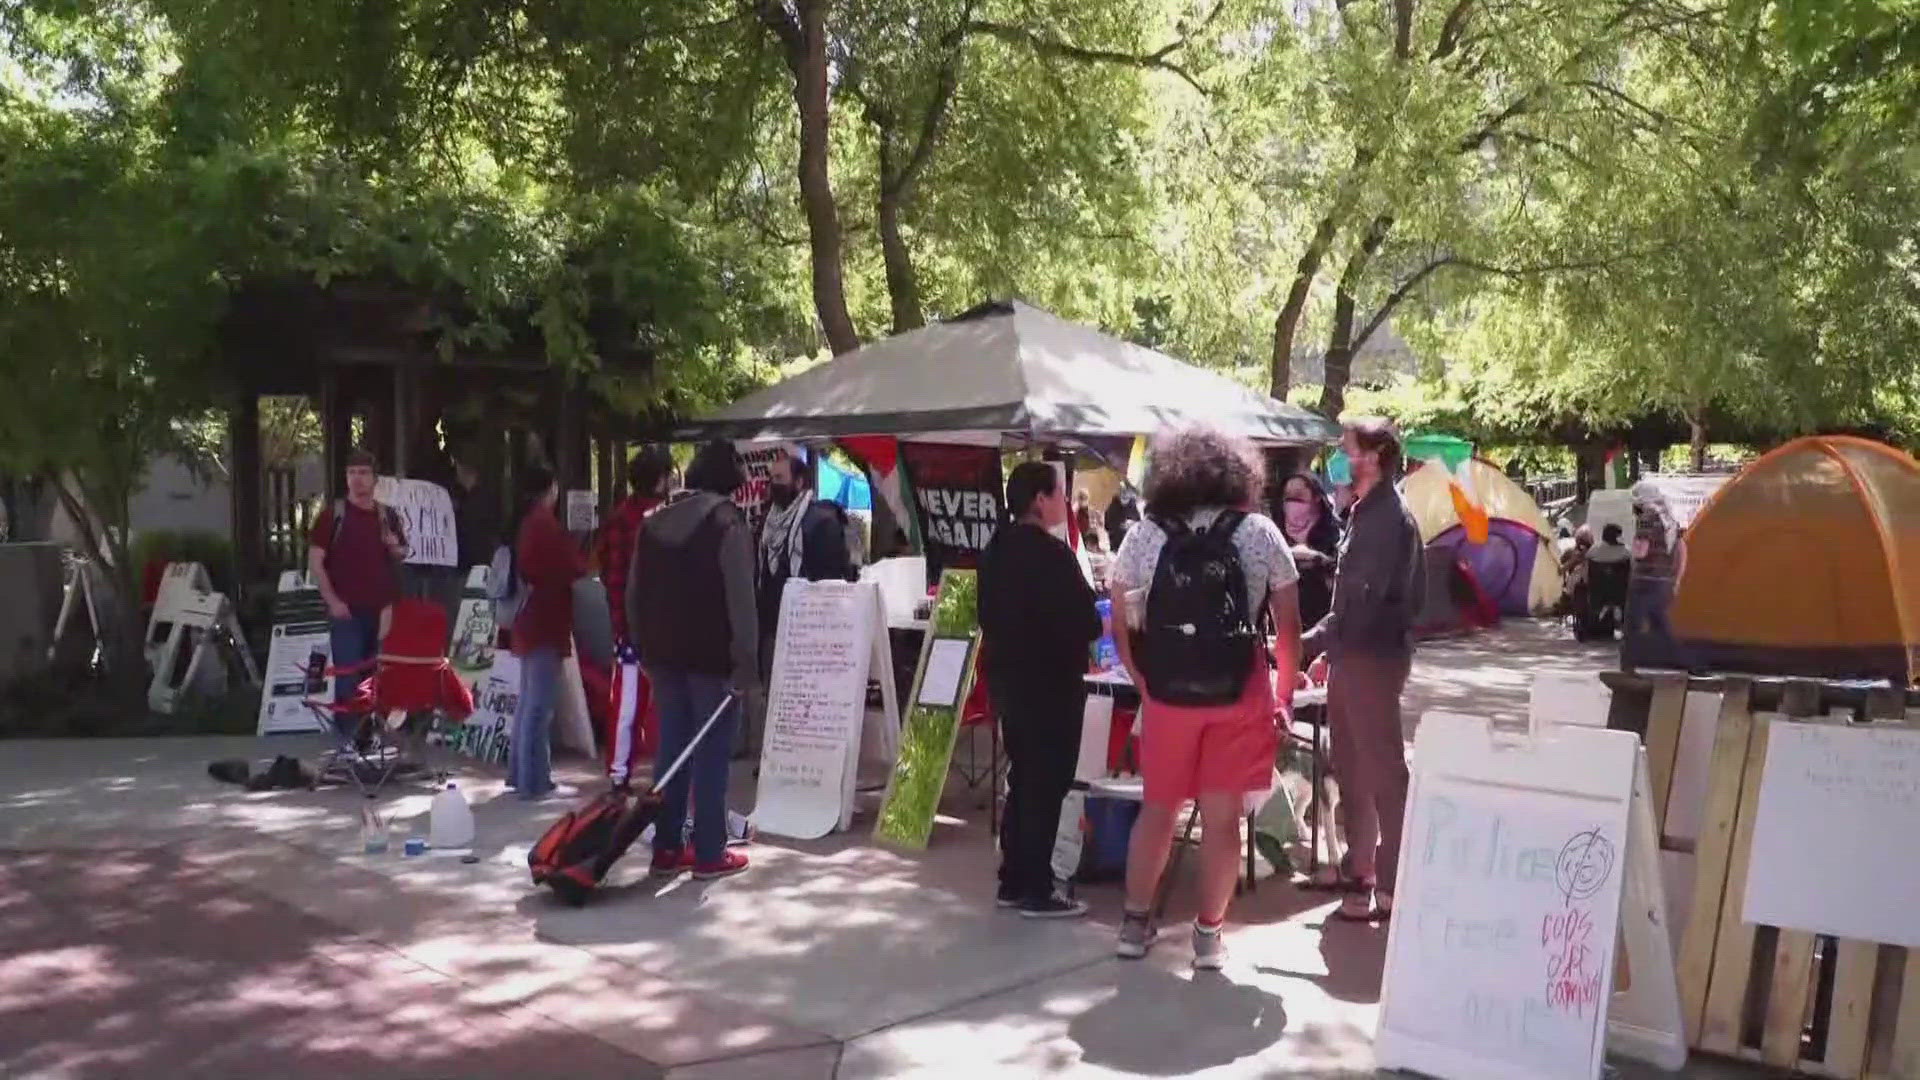 Day 2: Demonstrators gather at Sacramento State in Gaza war protest